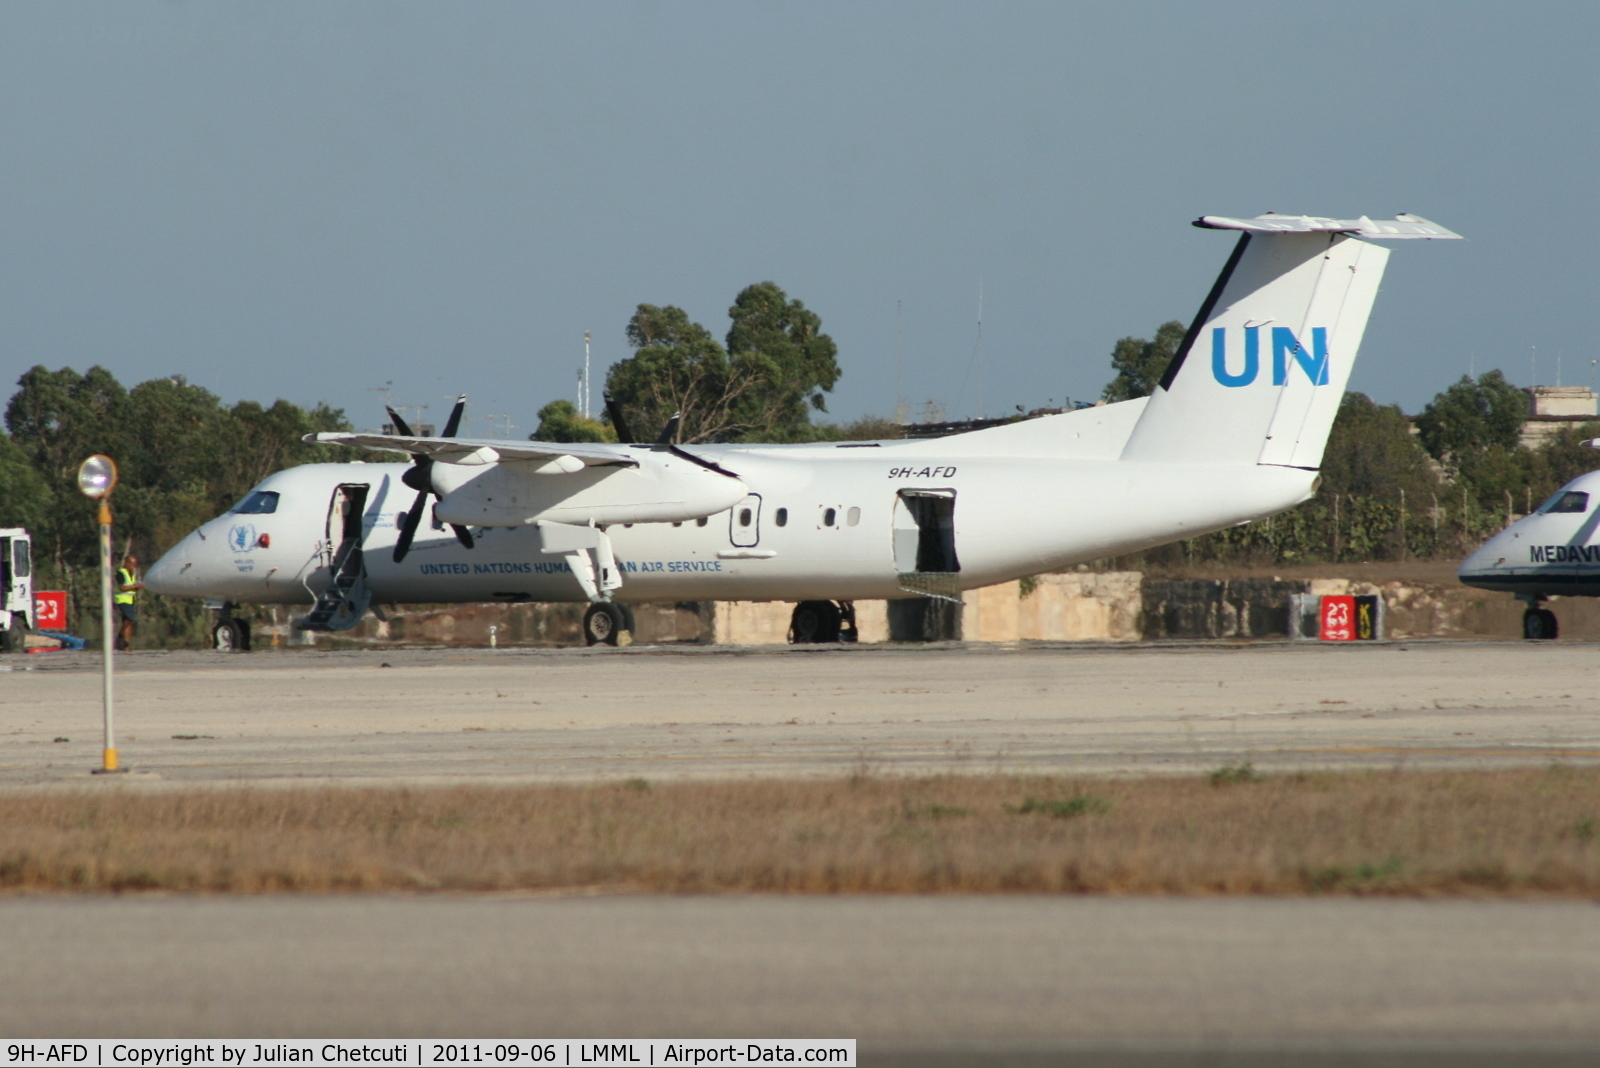 9H-AFD, 1997 De Havilland Canada DHC-8-311 Dash 8 C/N 458, Aircraft operated by United Nations Humanitarian Air Service